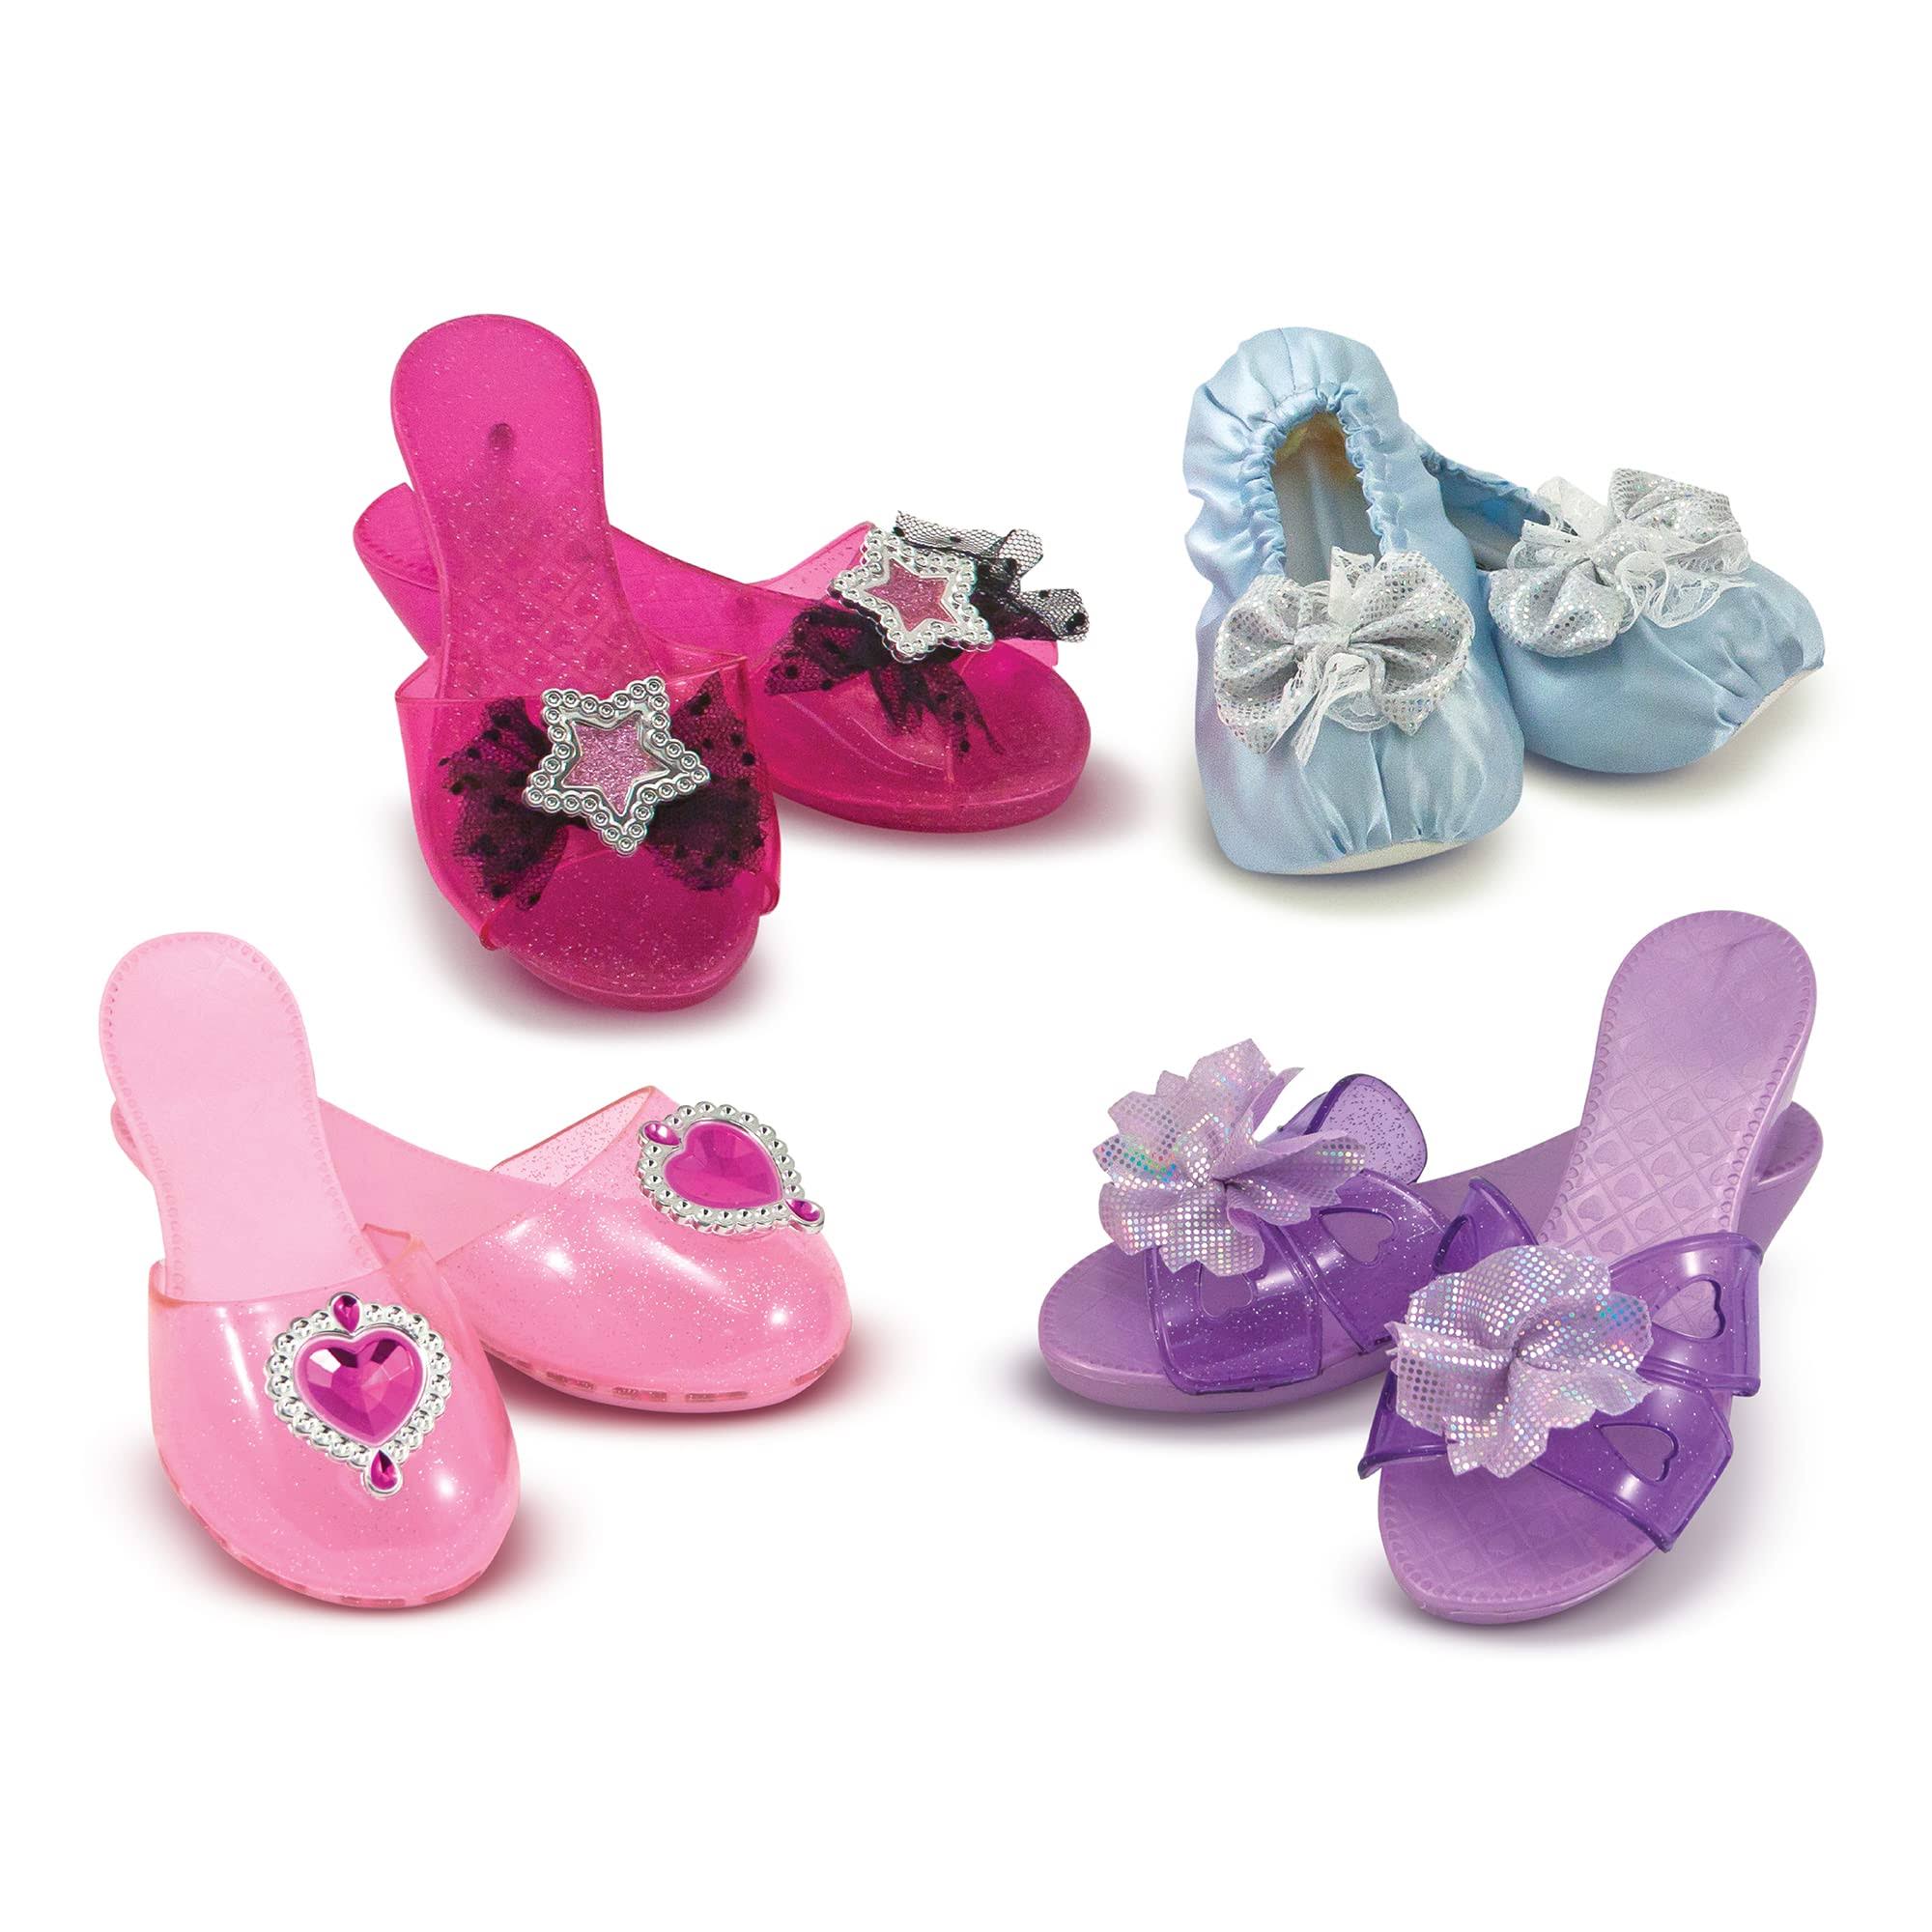 Melissa & Doug Step in Style Dress-Up Shoes, Ages 3 to 5, Set of 4 (8.5-11 Regular)